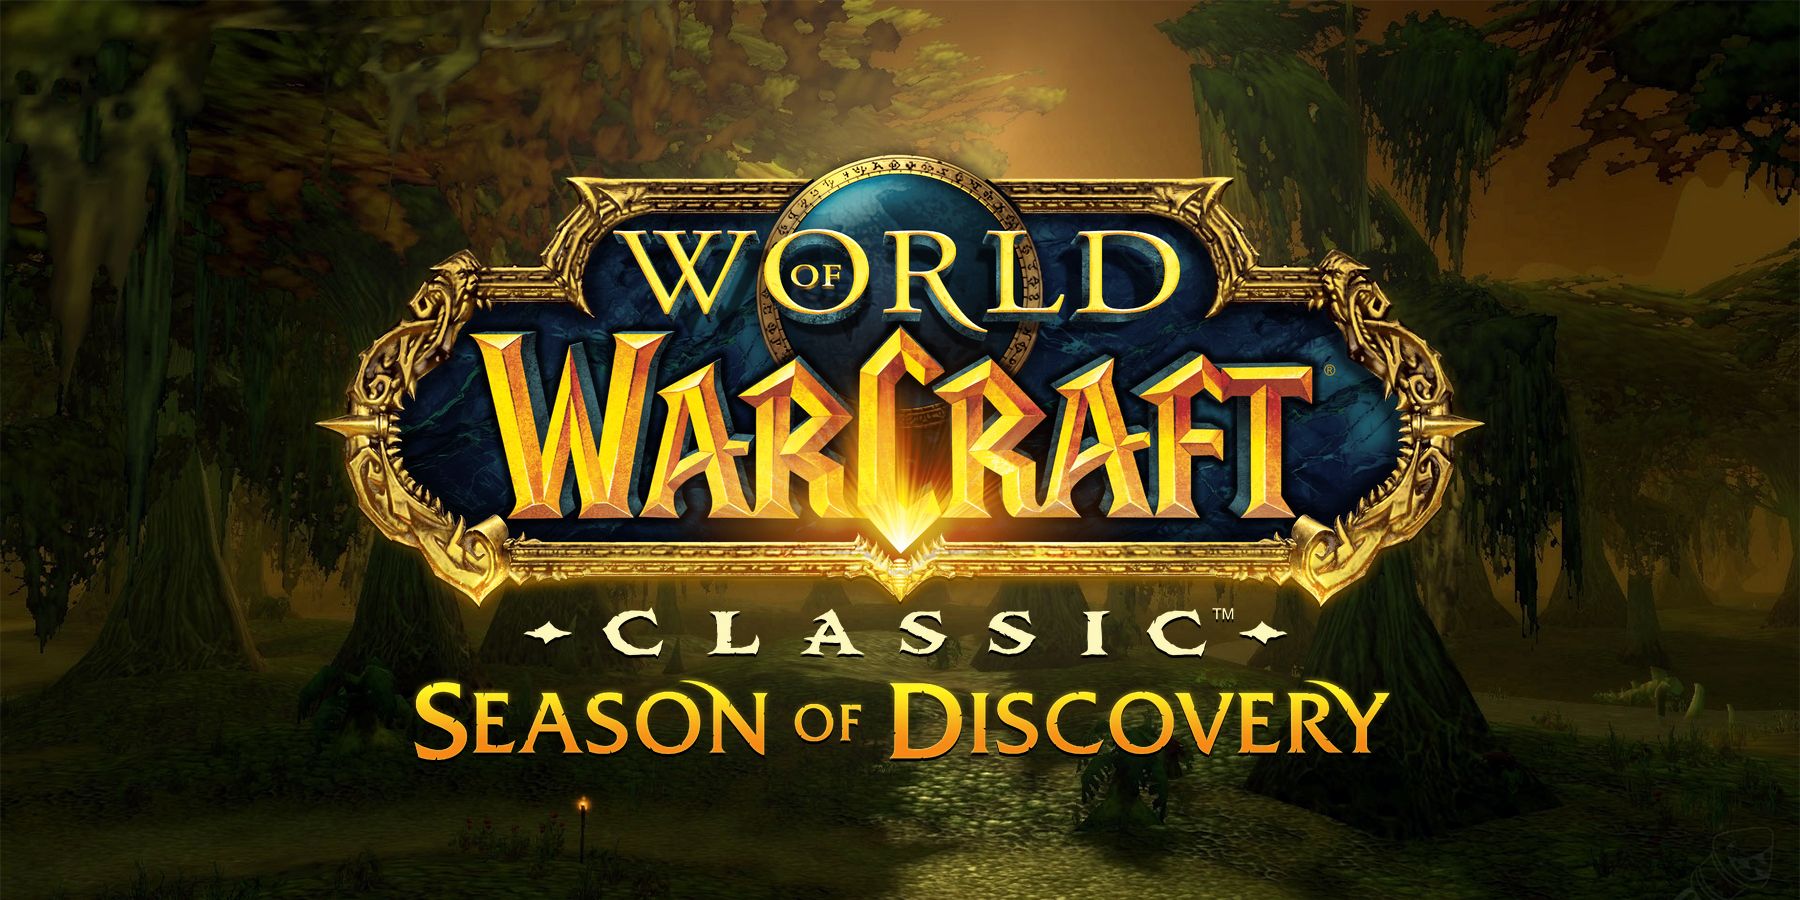 world of warcraft season of discovery adding new raid and world buff in phase 3